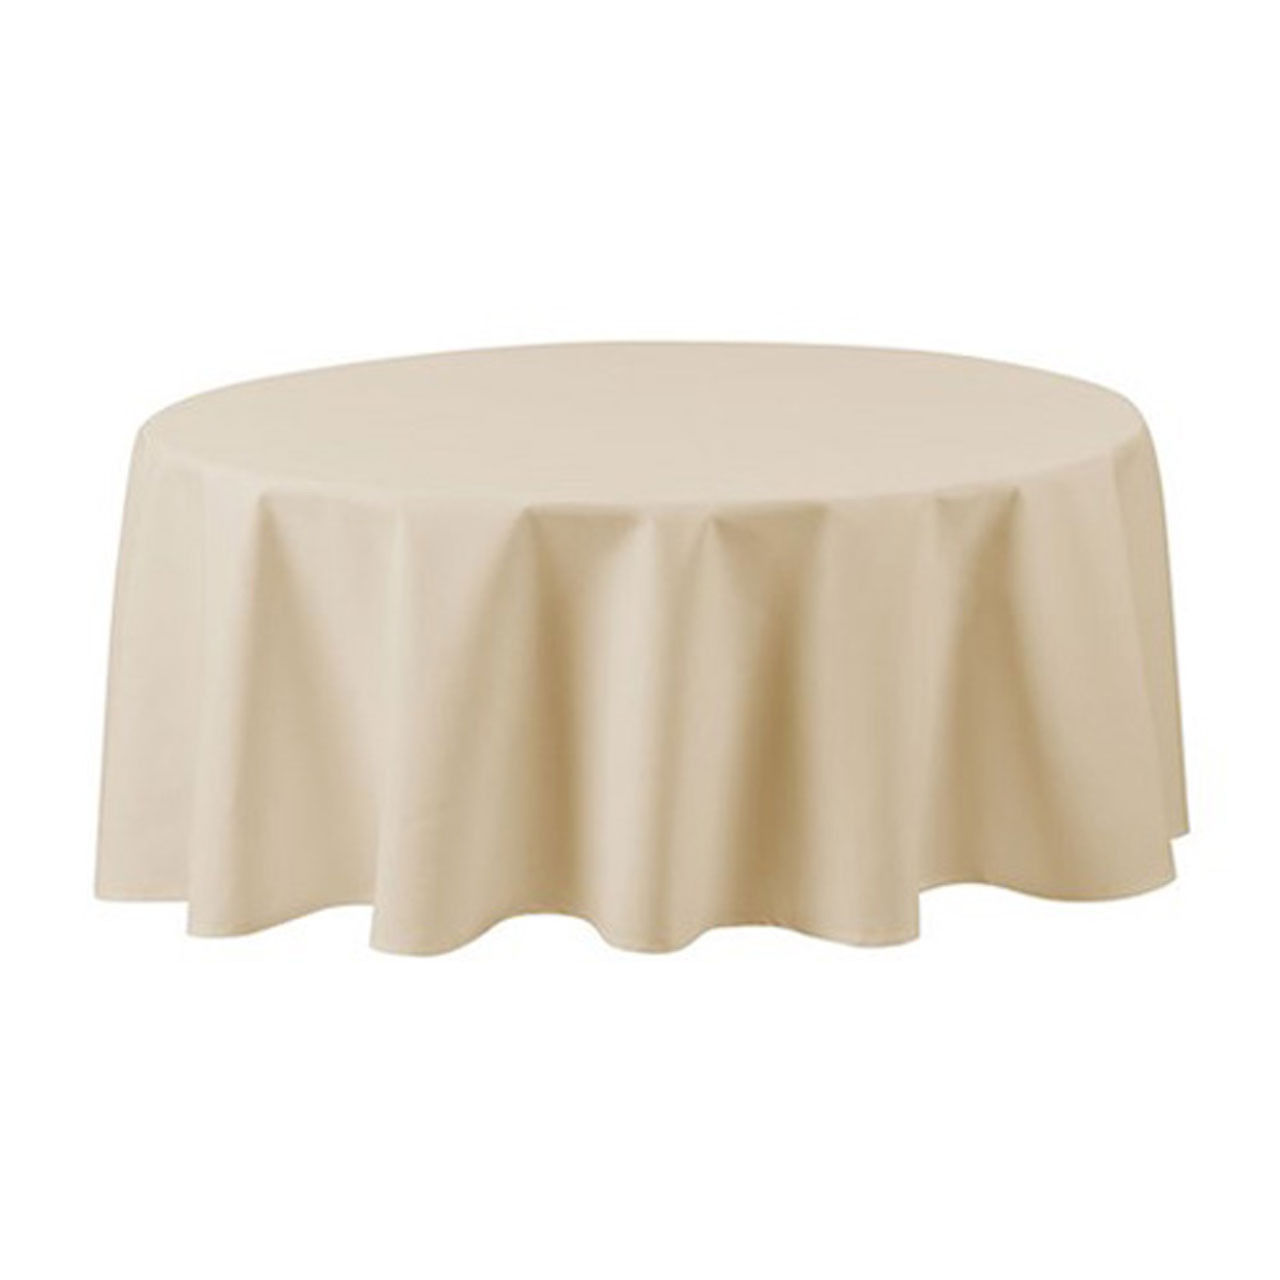 How heavy is the fabric of the 120 ivory round tablecloths?